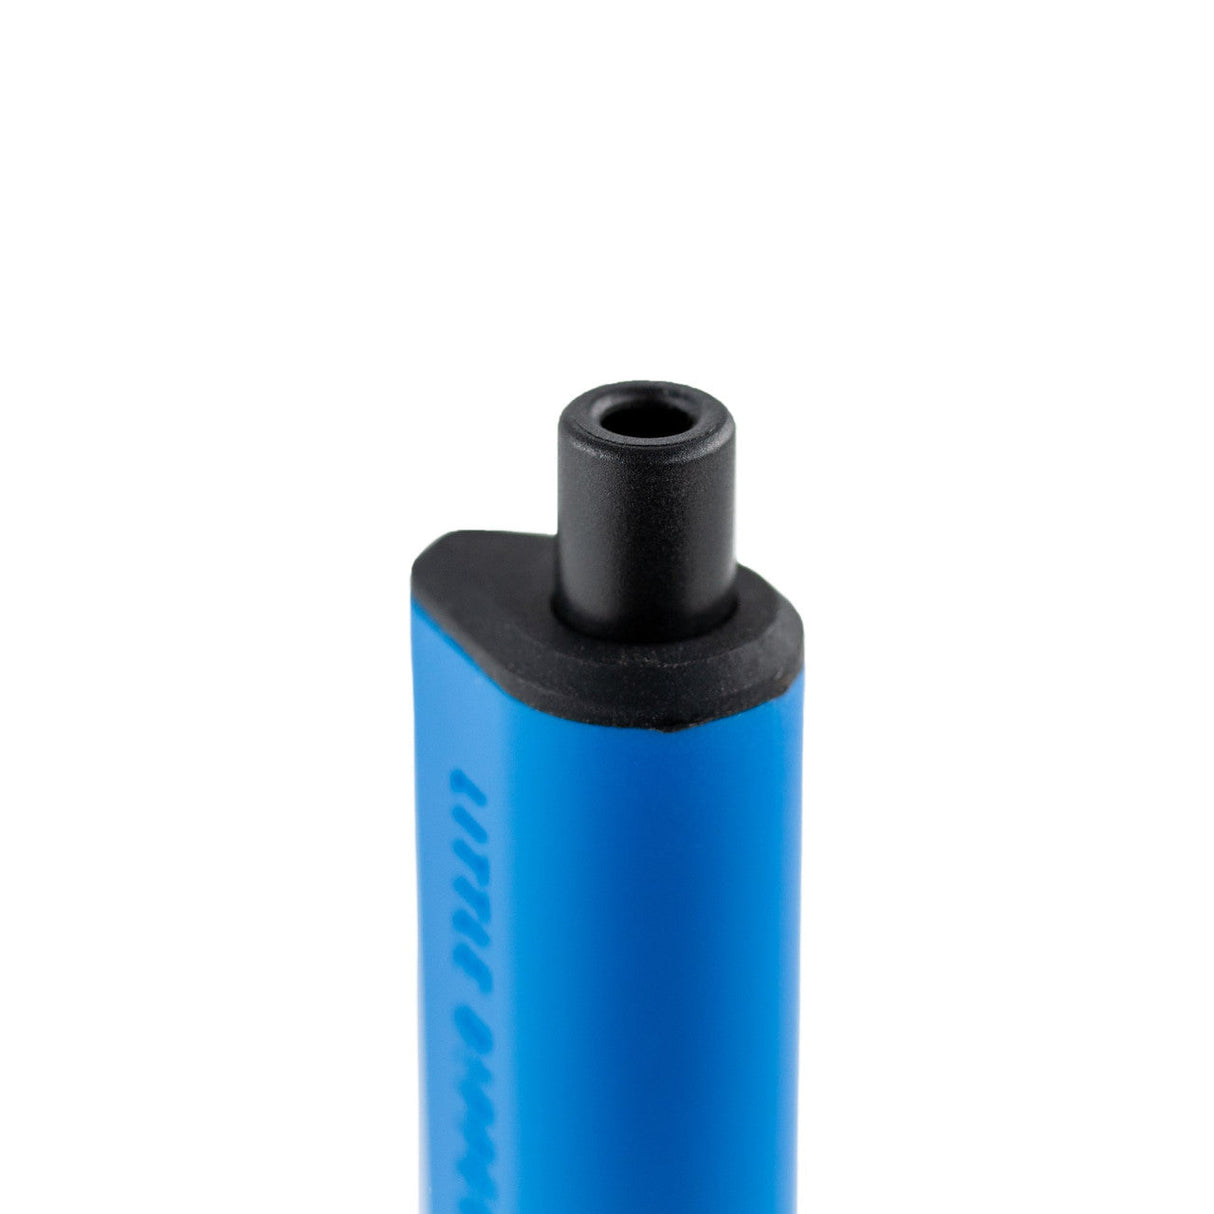 Dip Devices Little Dipper Vaporizer in blue, close-up side view, portable design for concentrates